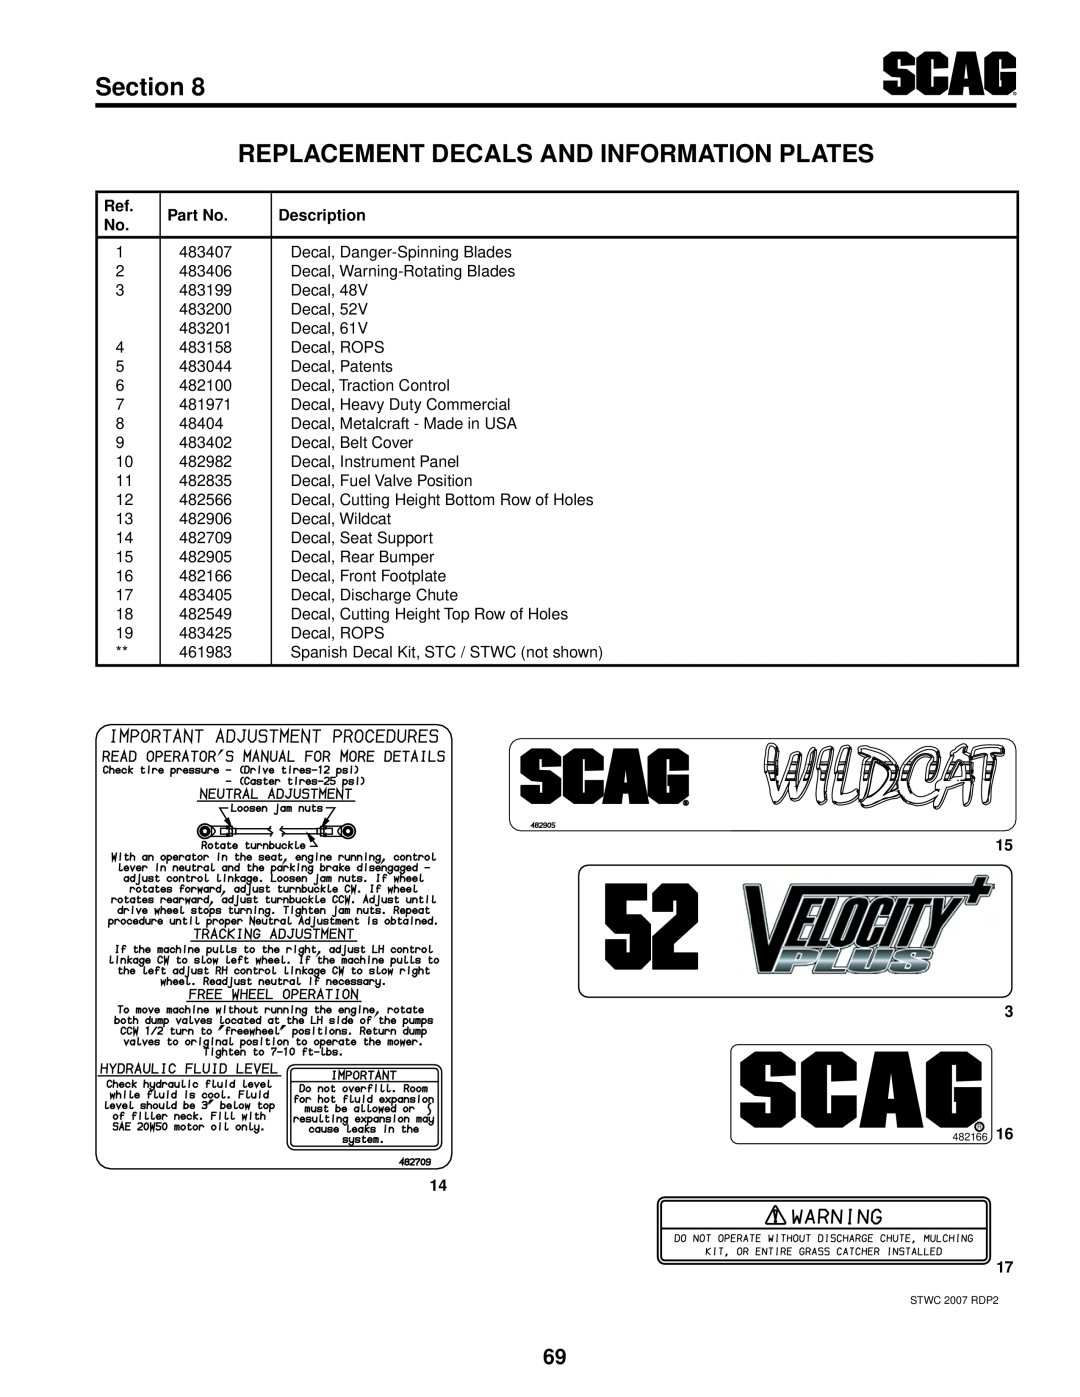 Scag Power Equipment STWC48V-25CV Section REPLACEMENT DECALS AND INFORMATION PLATES, Description, 482166R, STWC 2007 RDP2 